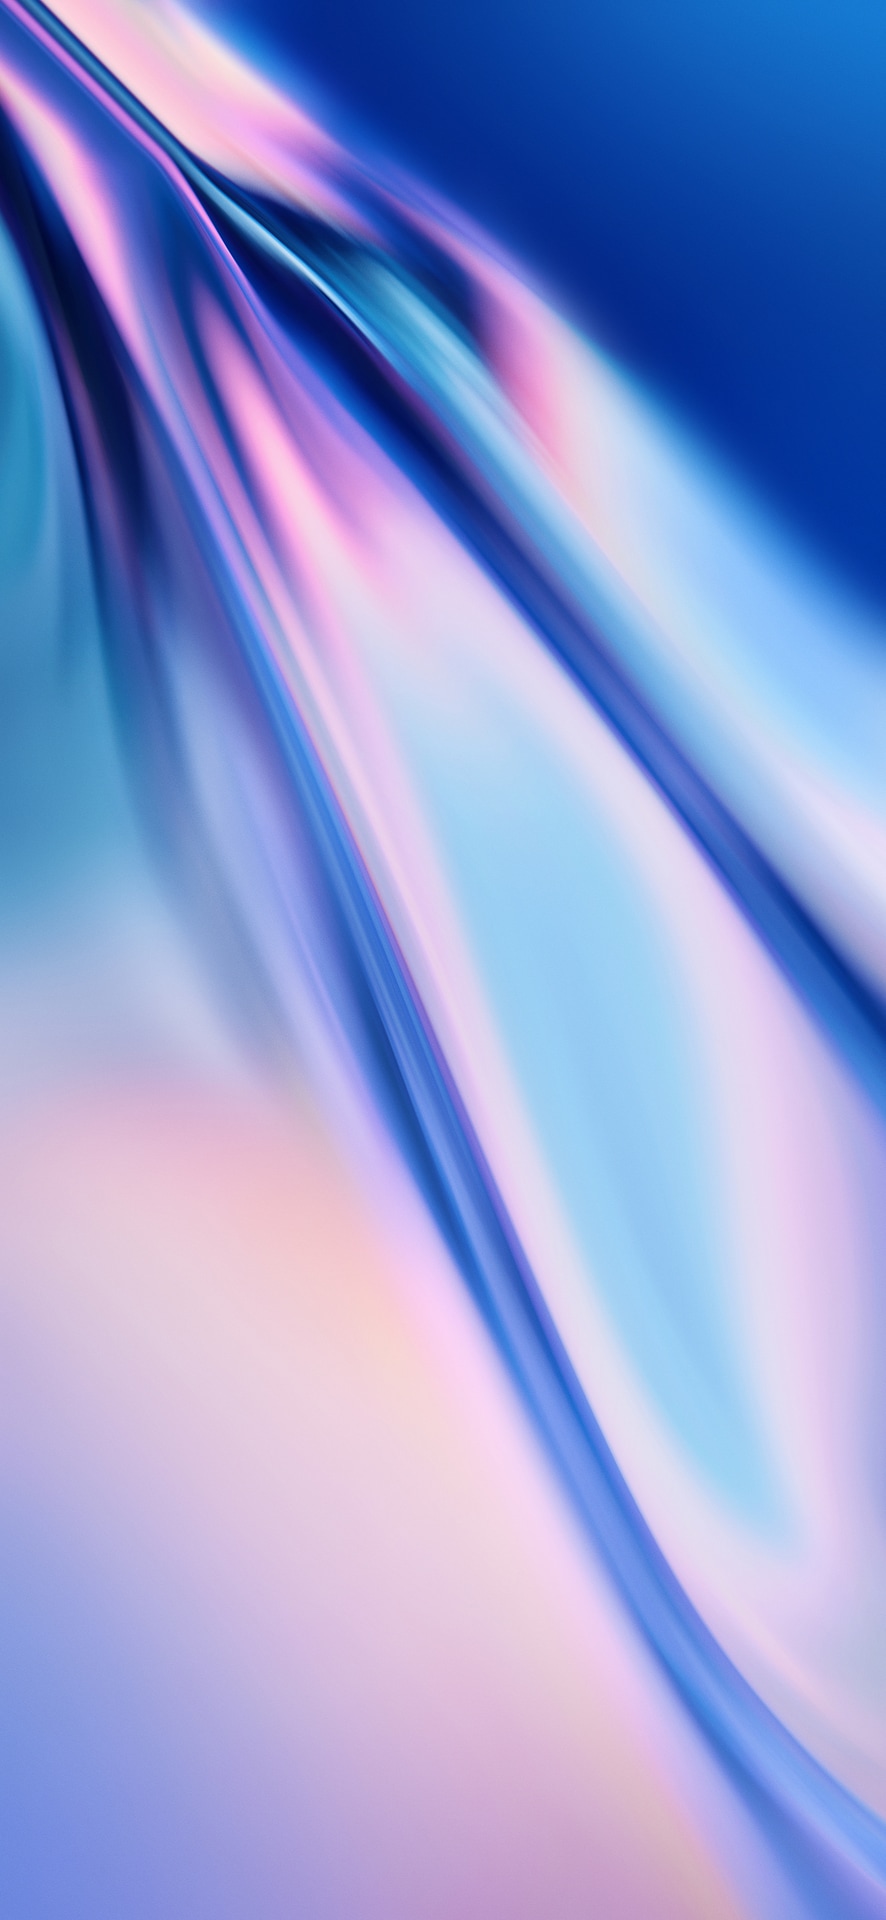 Free download Download the OnePlus 7 Pro wallpapers here Android Authority  [886x1920] for your Desktop, Mobile & Tablet | Explore 25+ OnePlus 7  Wallpapers | Window 7 Backgrounds, Tekken 7 Wallpaper, Eureka 7 Wallpaper